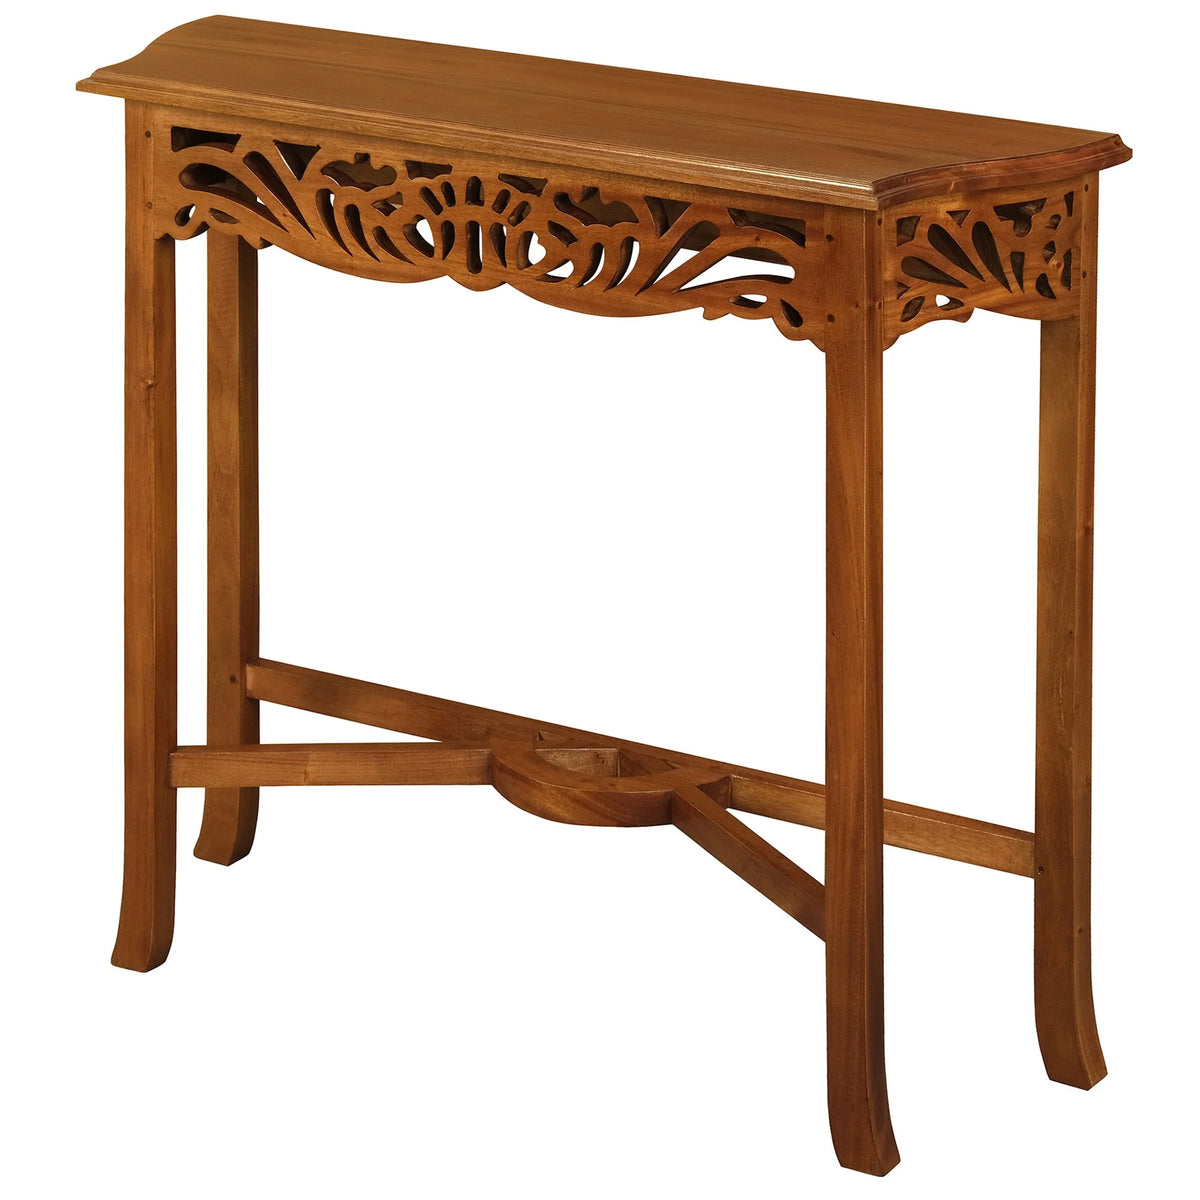 Jepara Handcarved Timber Console in Light Pecan - 82cm - Notbrand